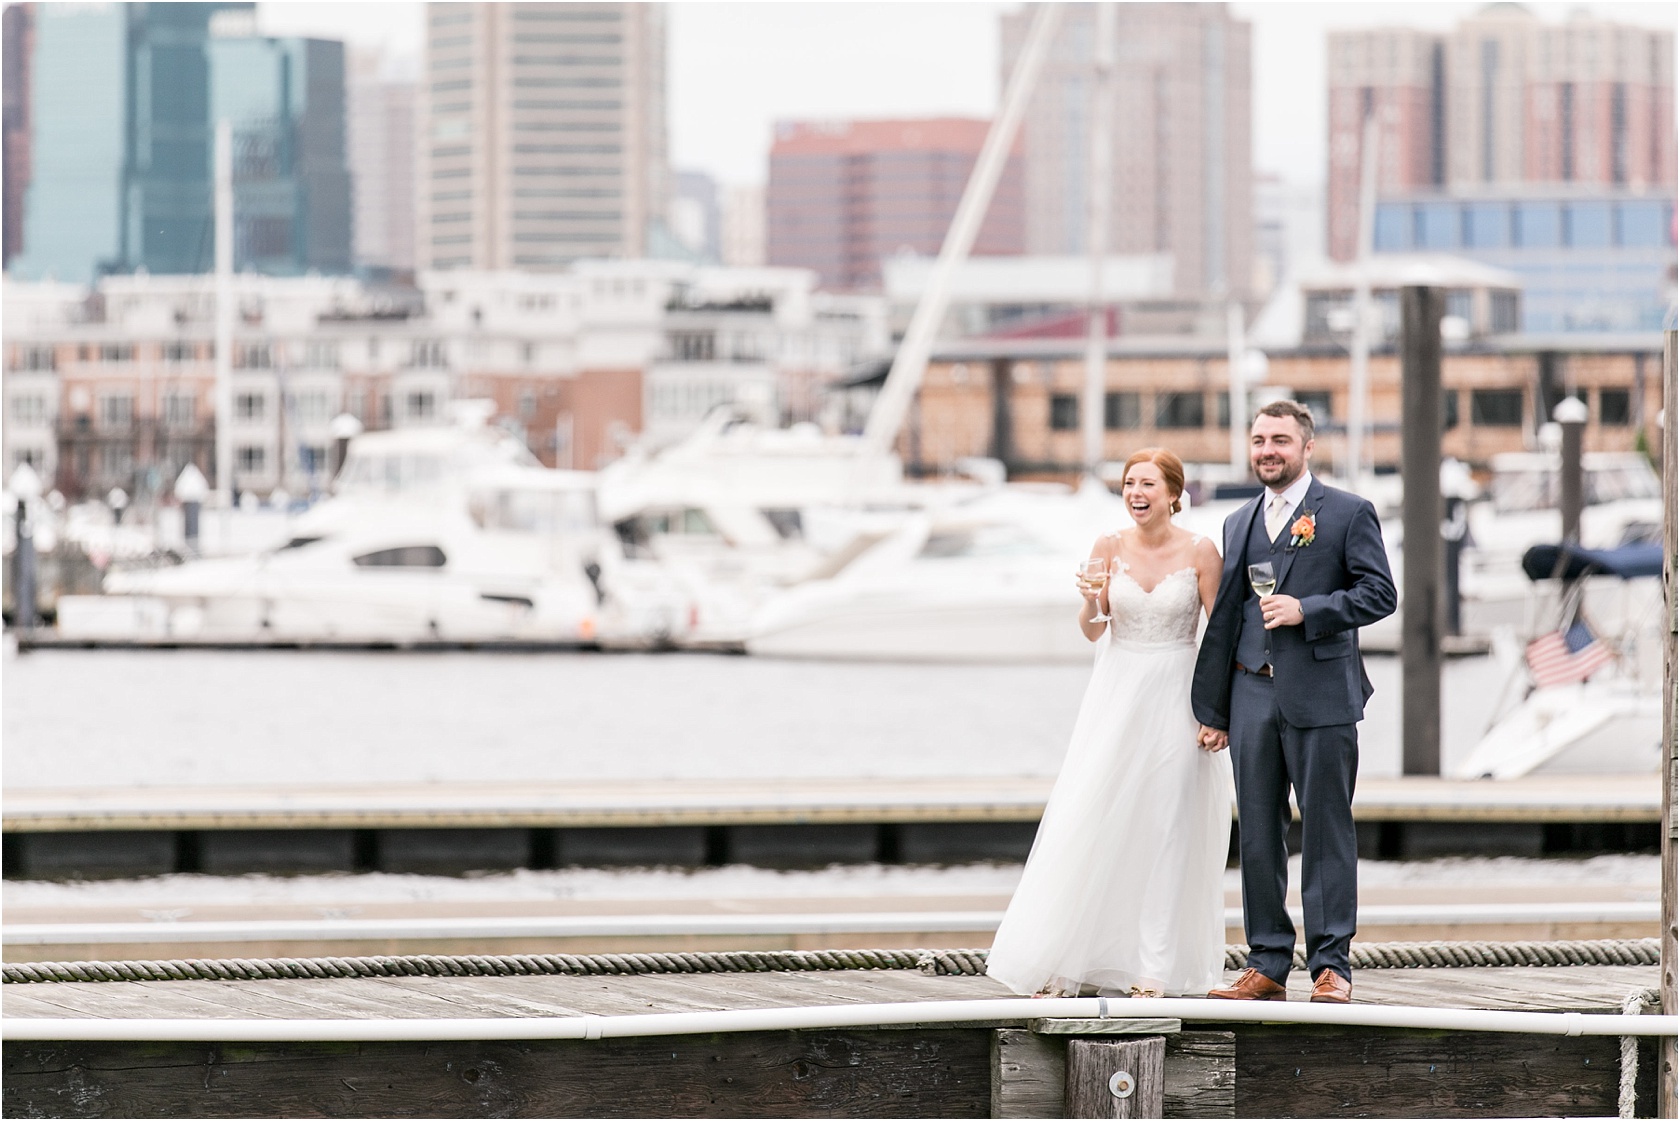 Rowland Baltimore Museum of Industry Wedding Living Radiant Photography photos_0108.jpg